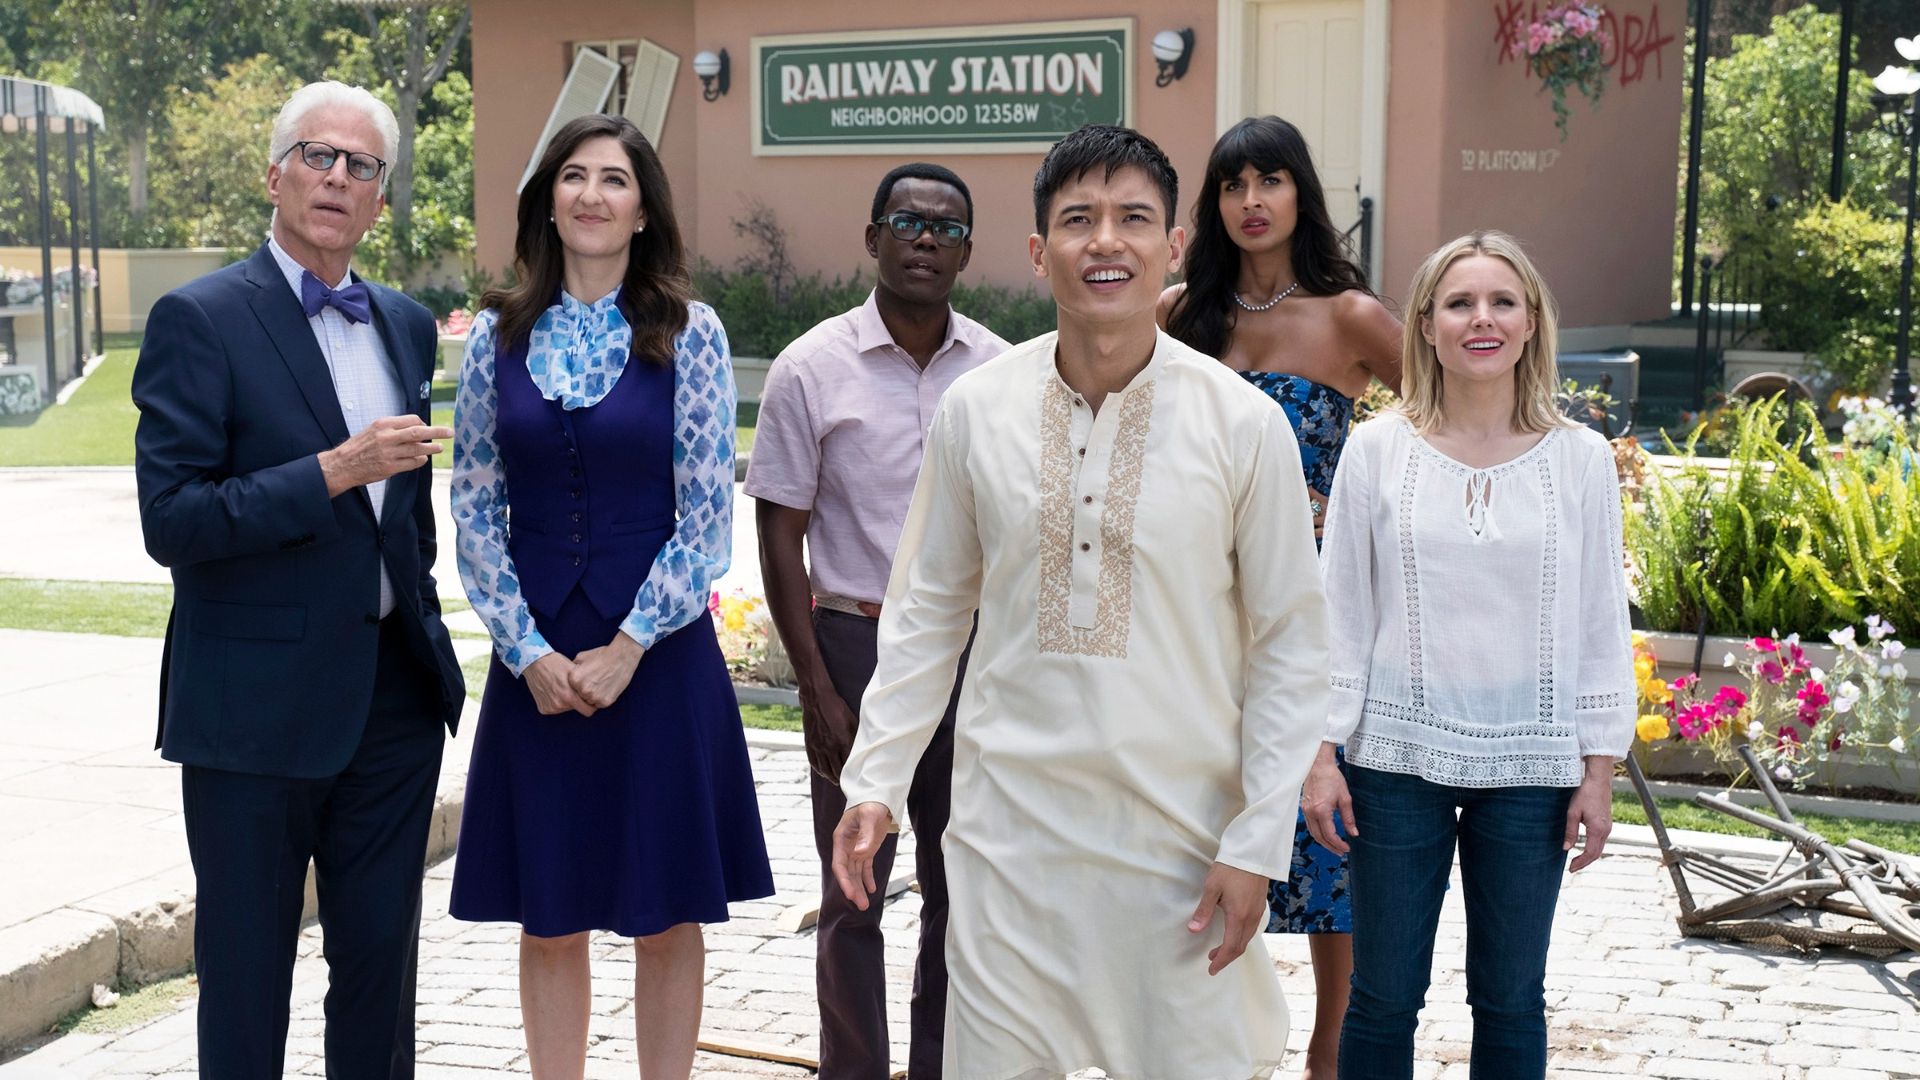 The Good Place - one of the best Netflix shows you can watch right now